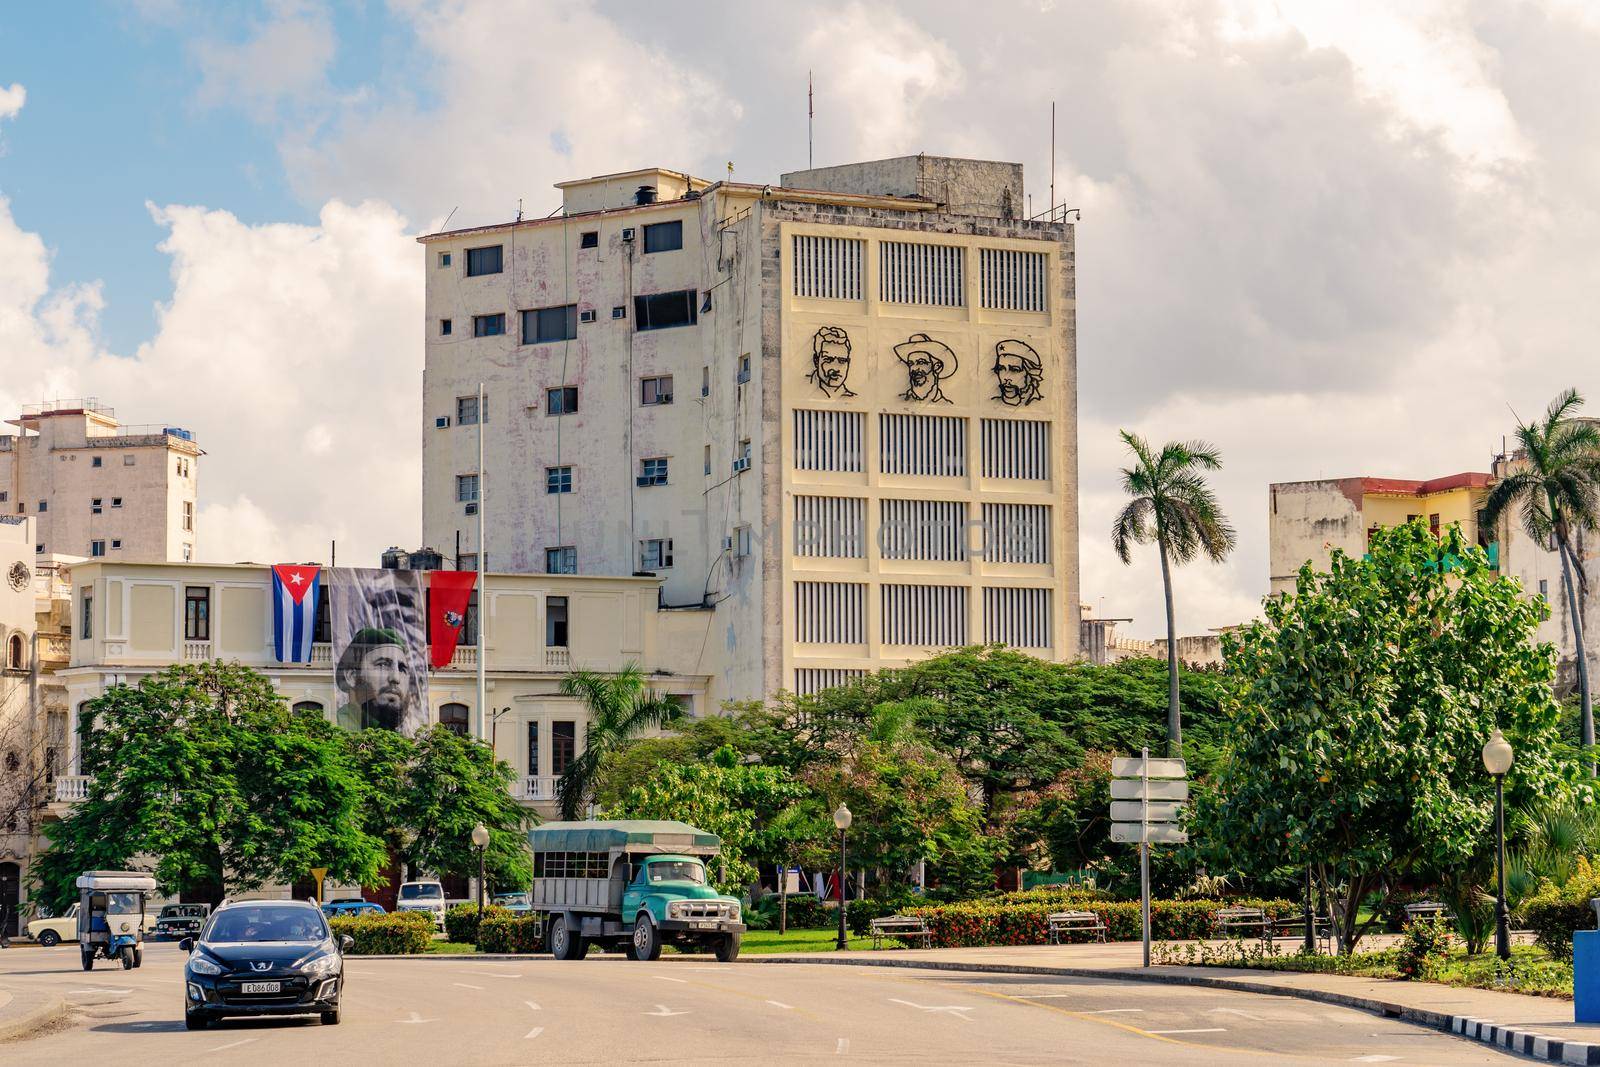 Havana Cuba. November 25, 2020: Building of the Union of Young Communists of Cuba, on its facade the image of Mella, Camilo and Che.